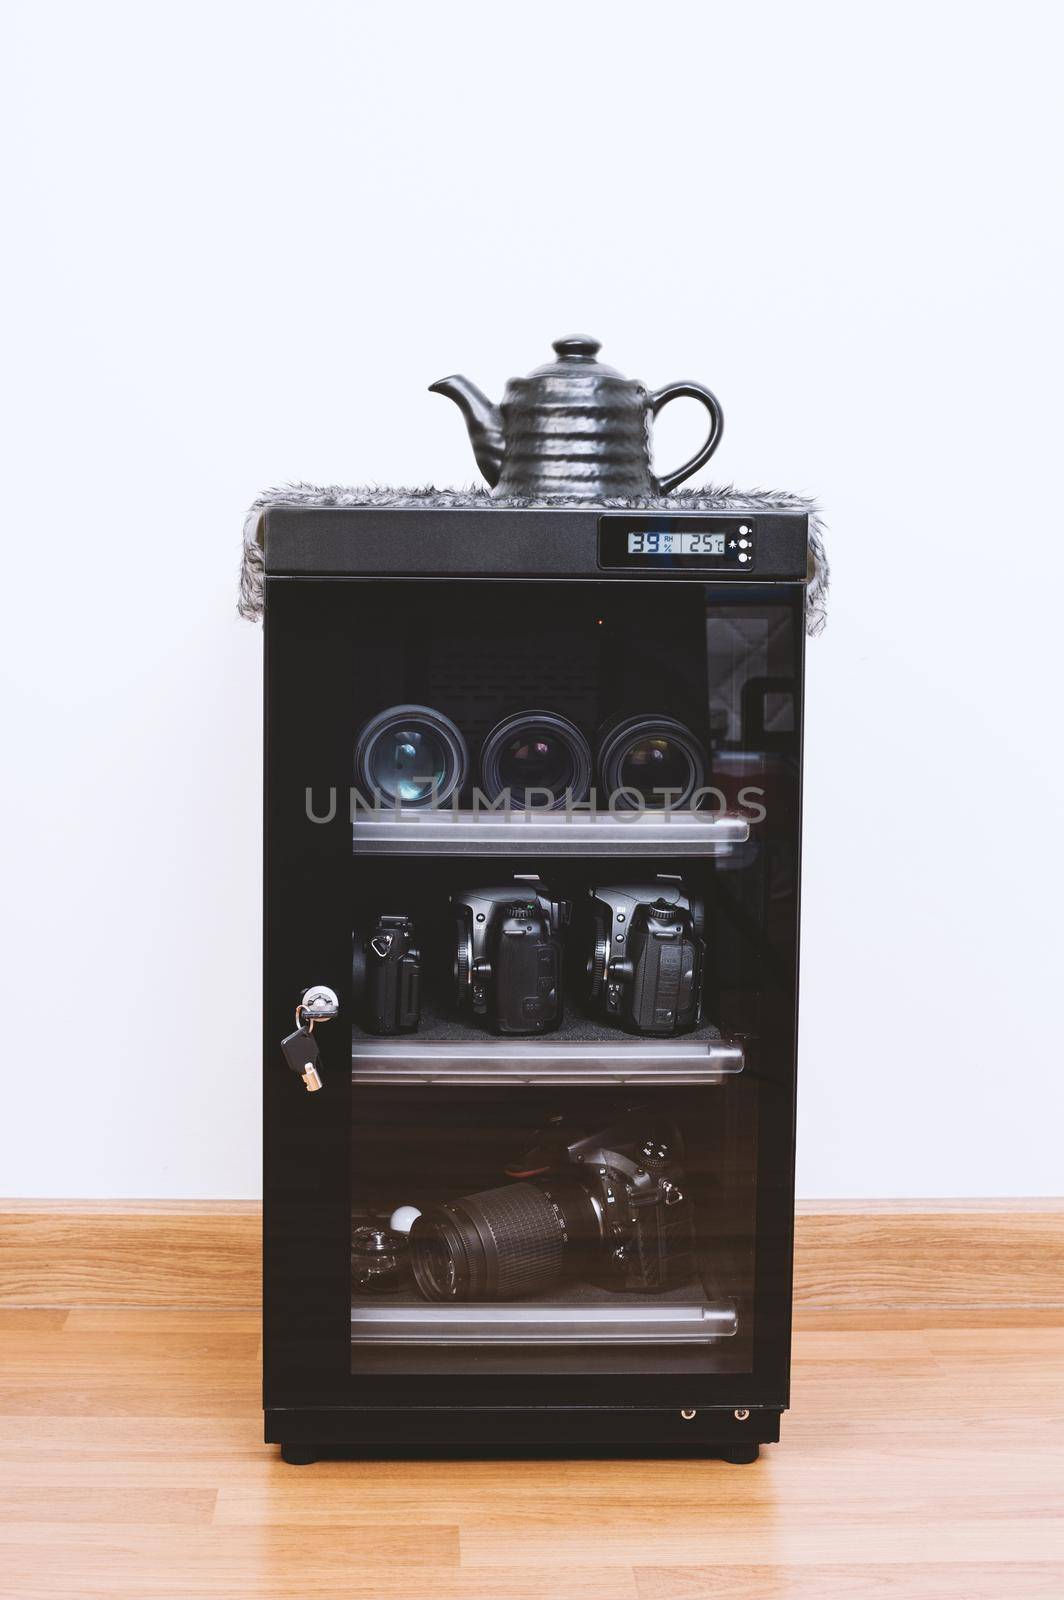 electronic dehumidify dry cabinet for storage cameras lens and other photography equipment. Closeup at status display of the cabinet.